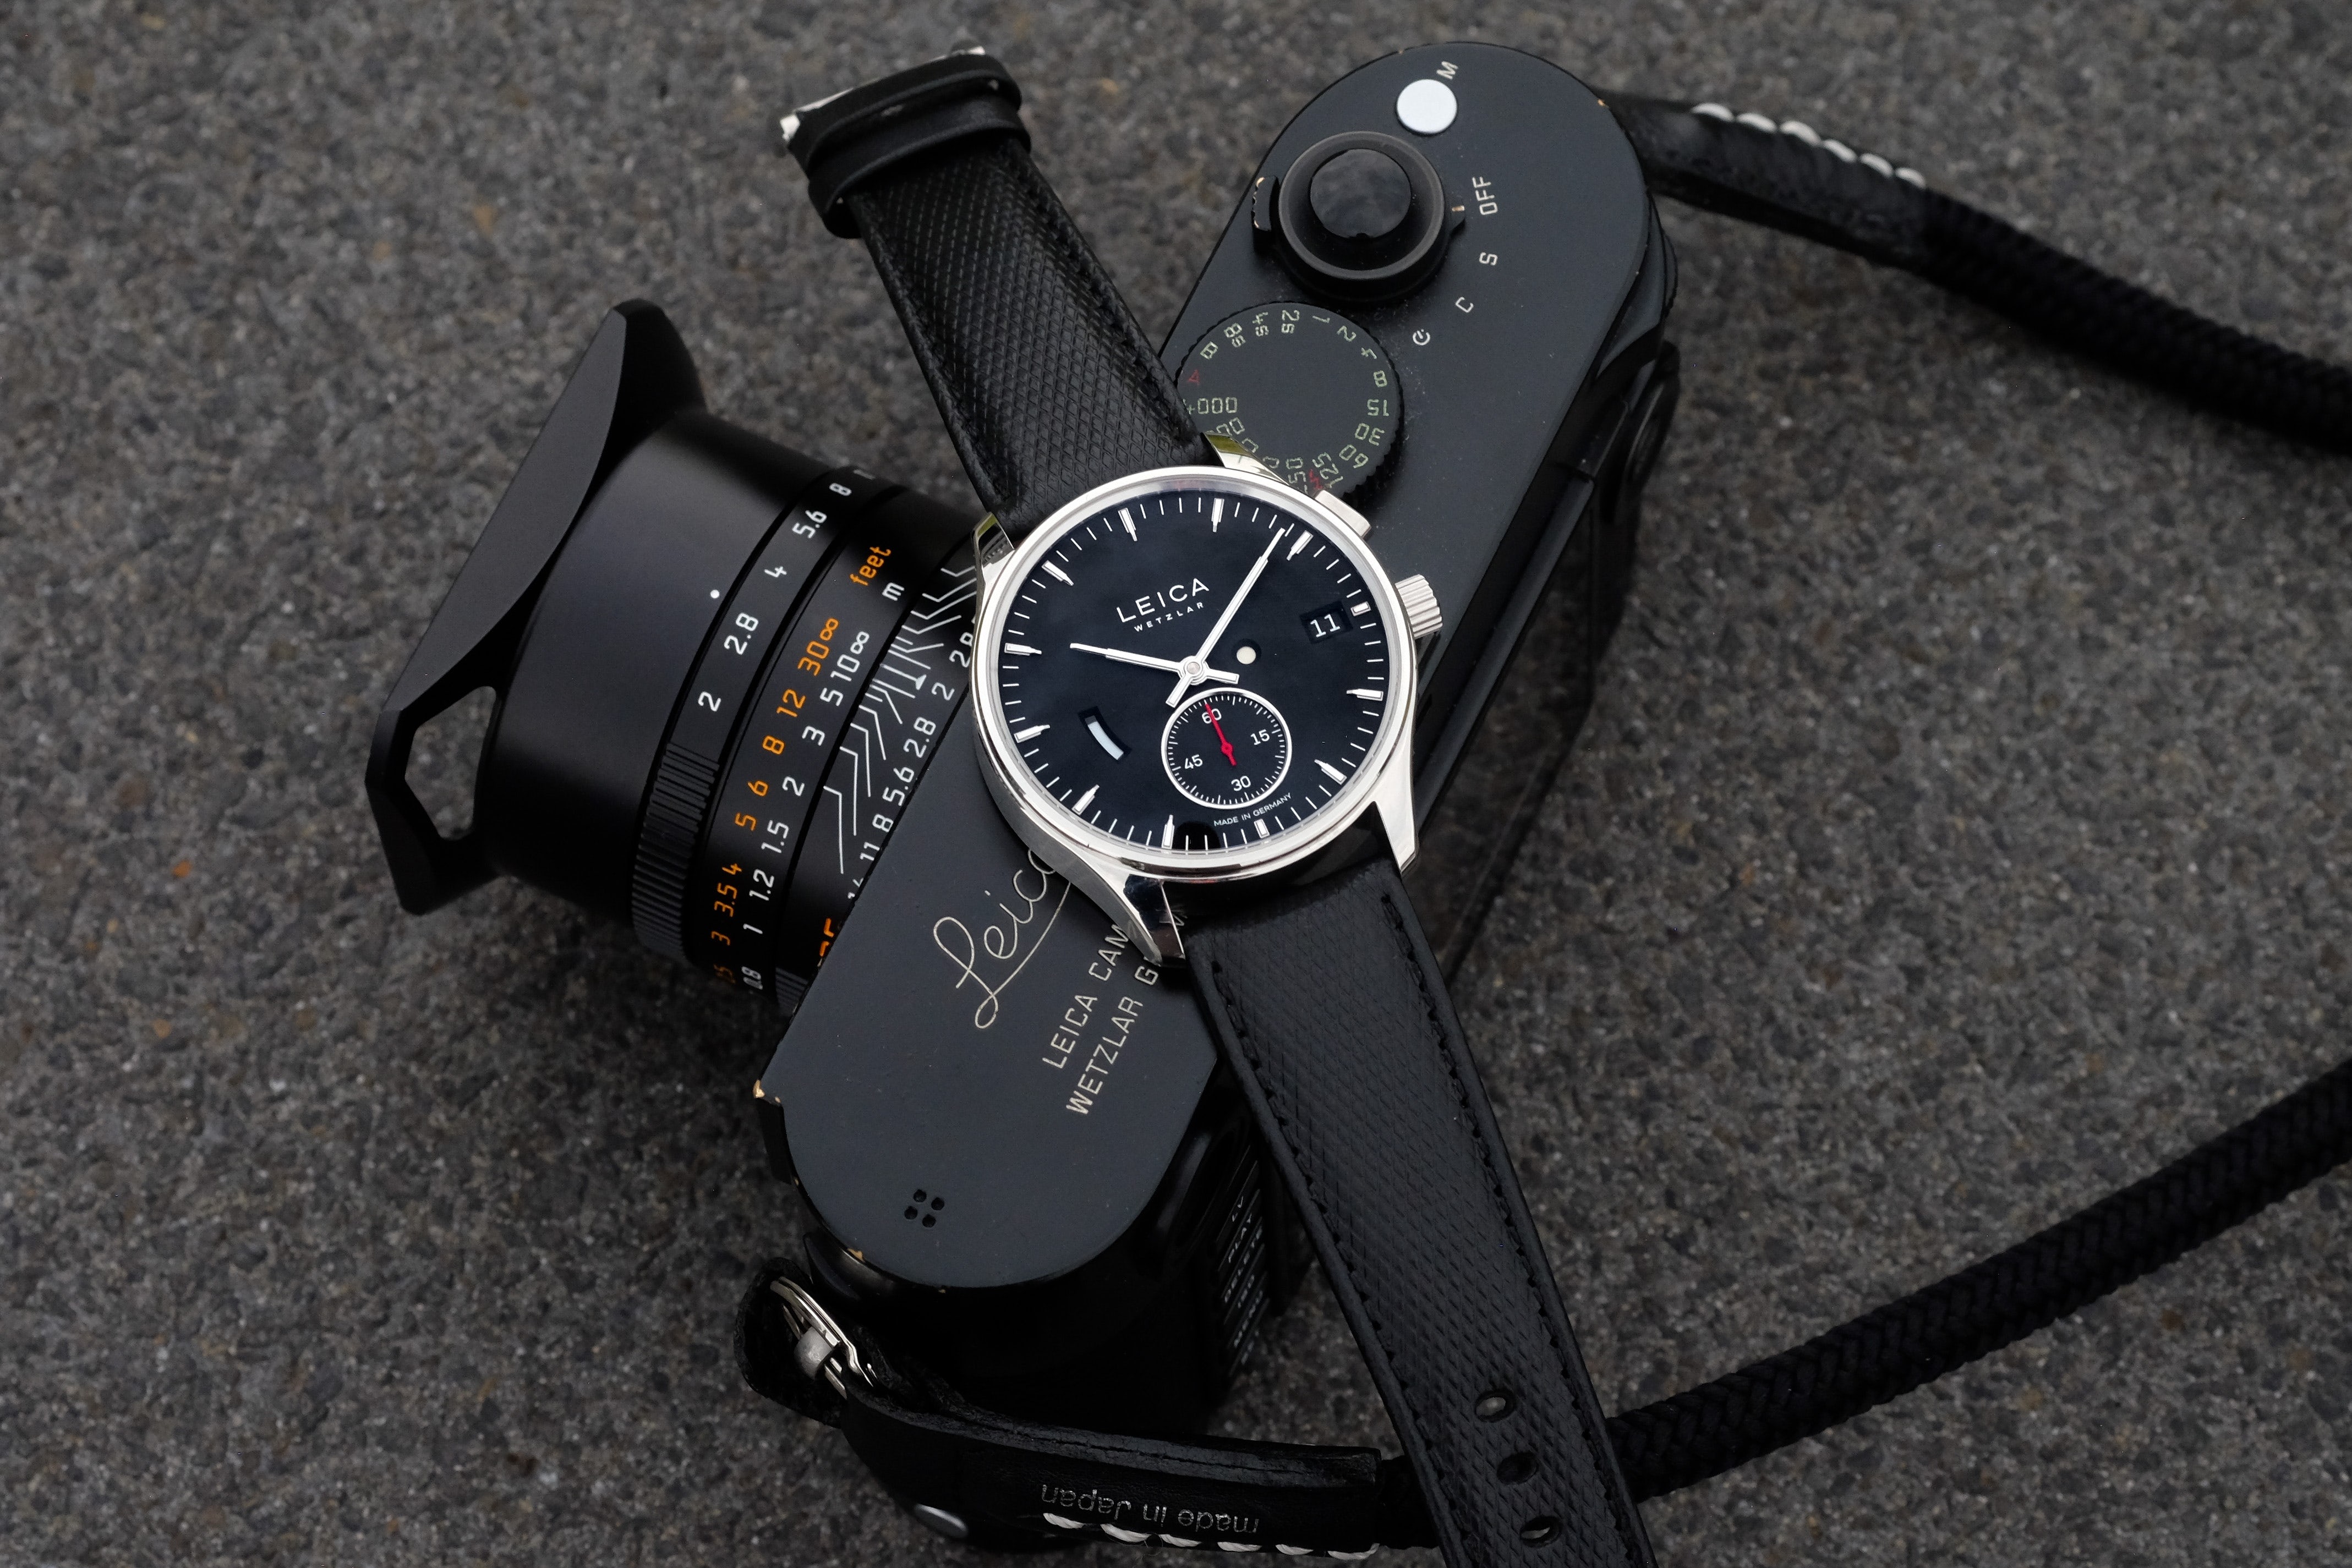 Cult camera-maker Leica reveals its very own L1 and L2 watches